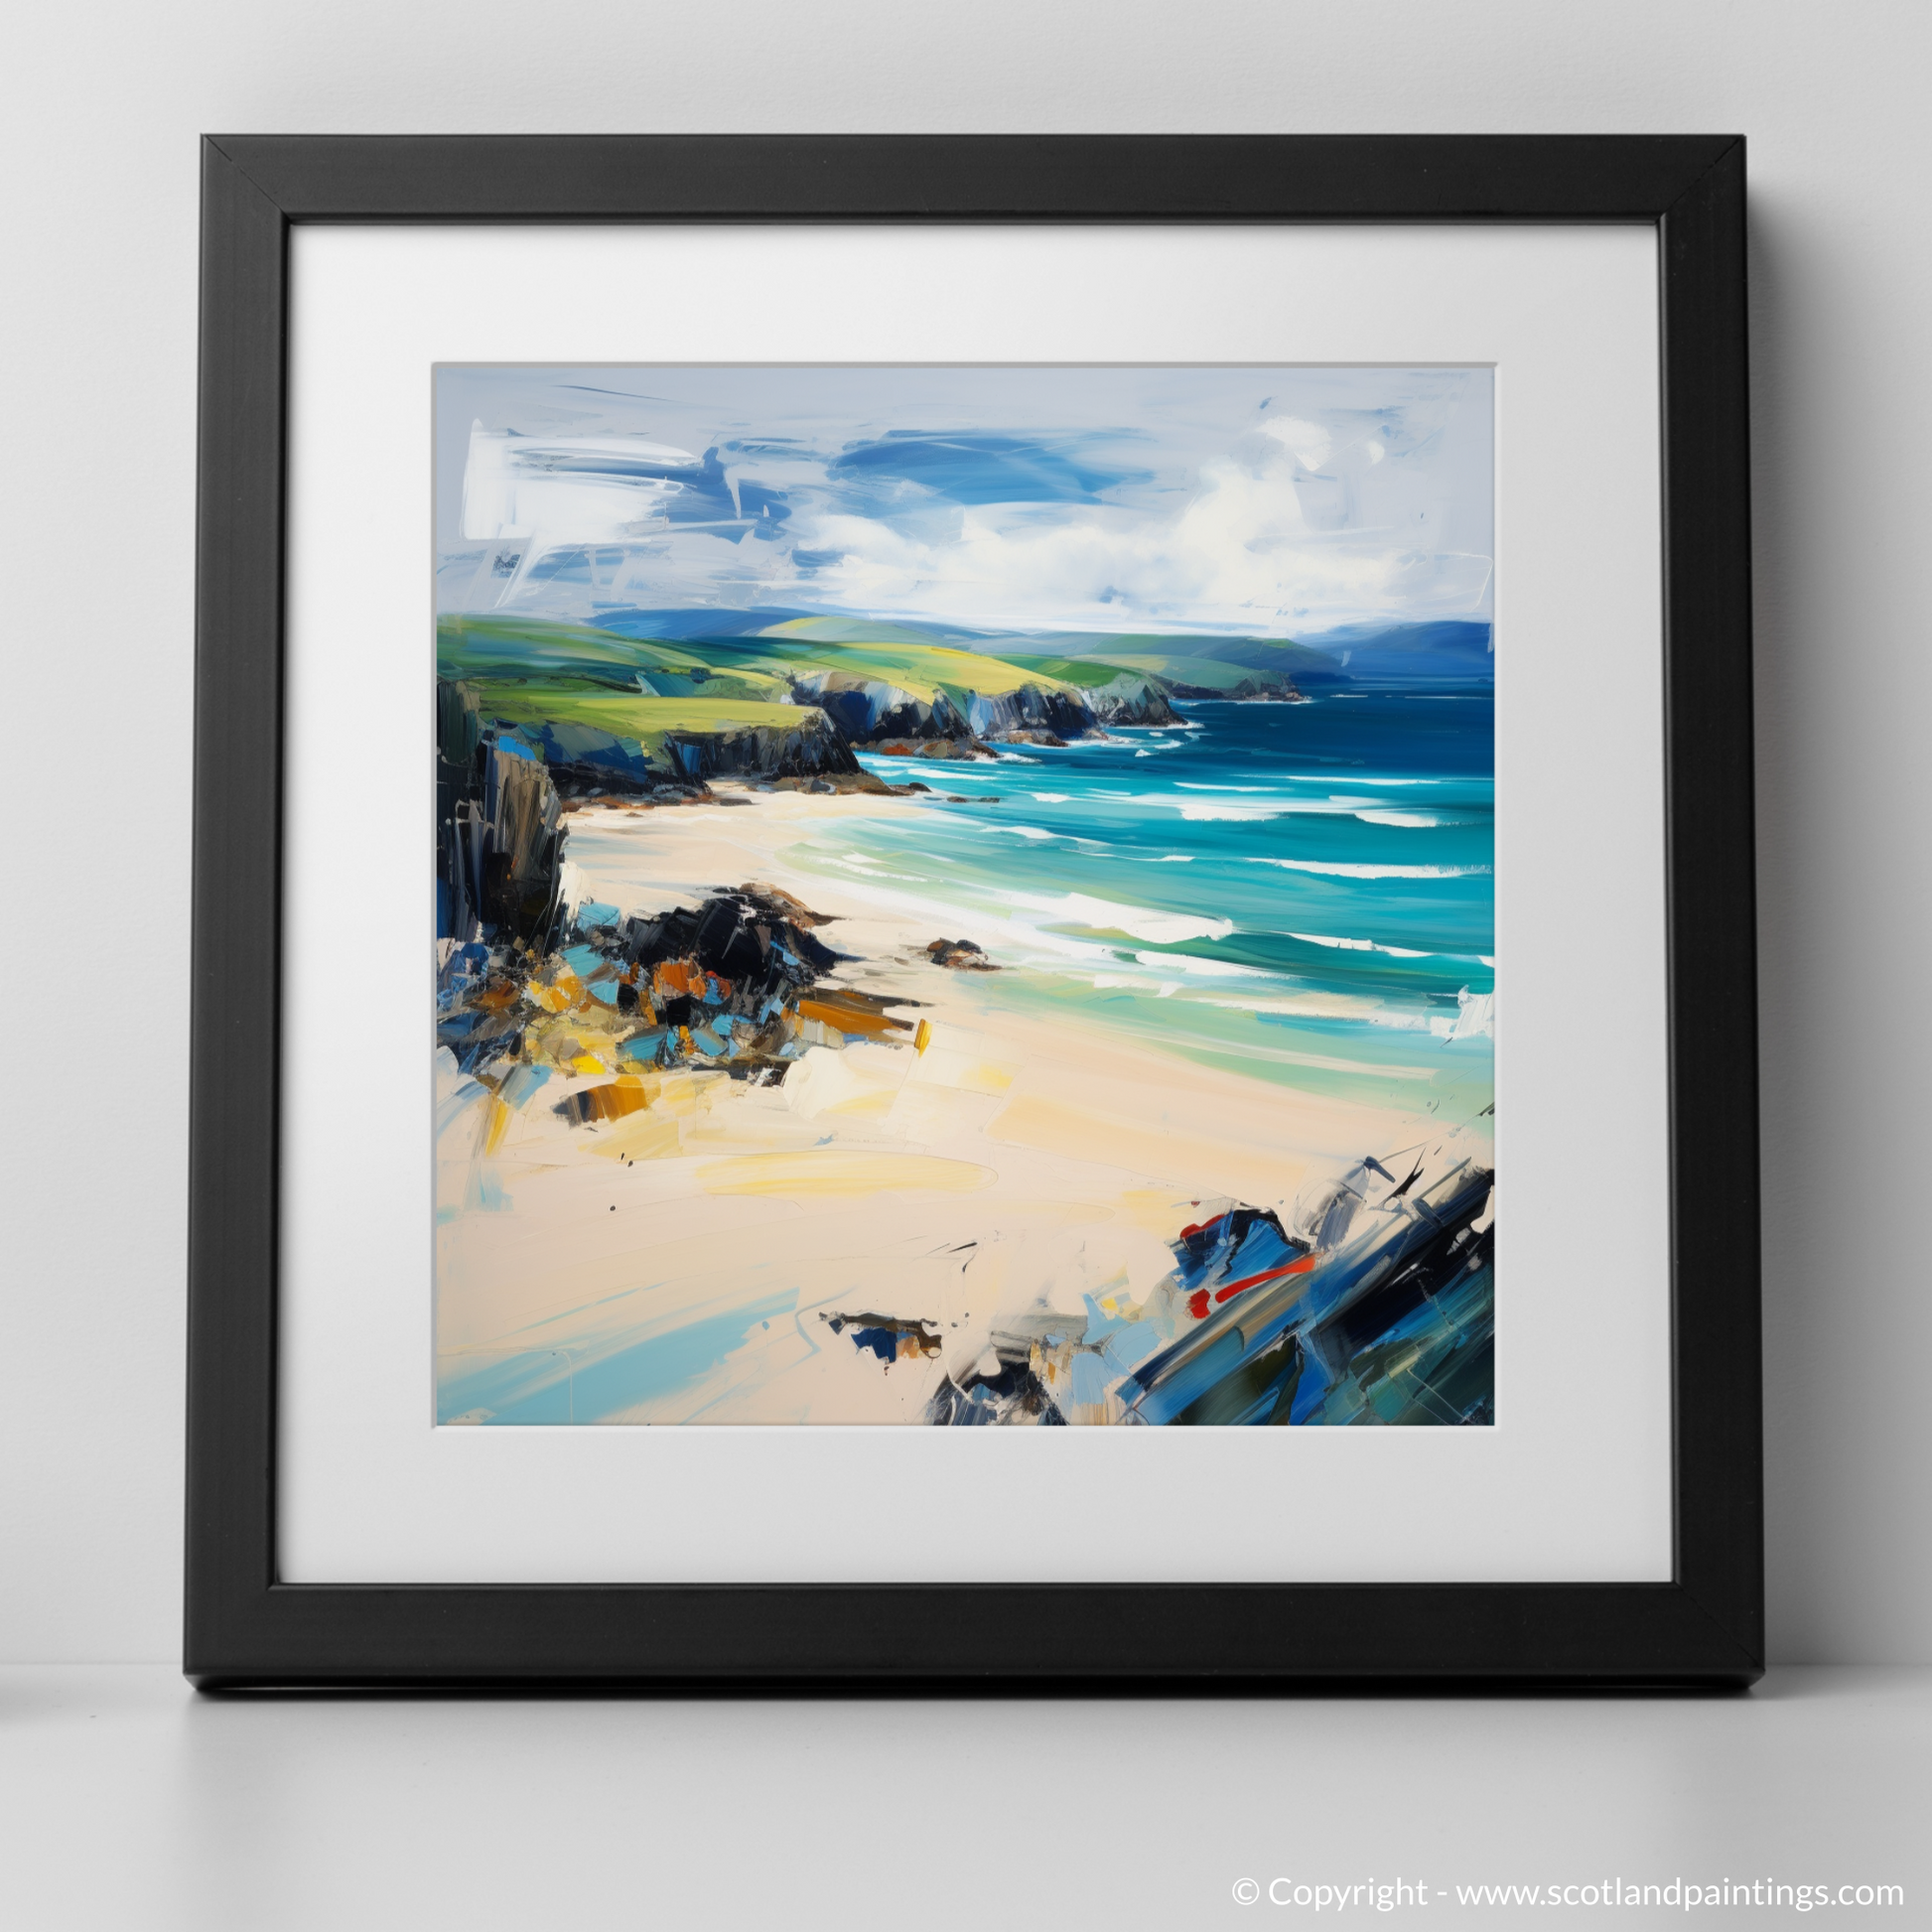 Art Print of Durness Beach, Sutherland with a black frame